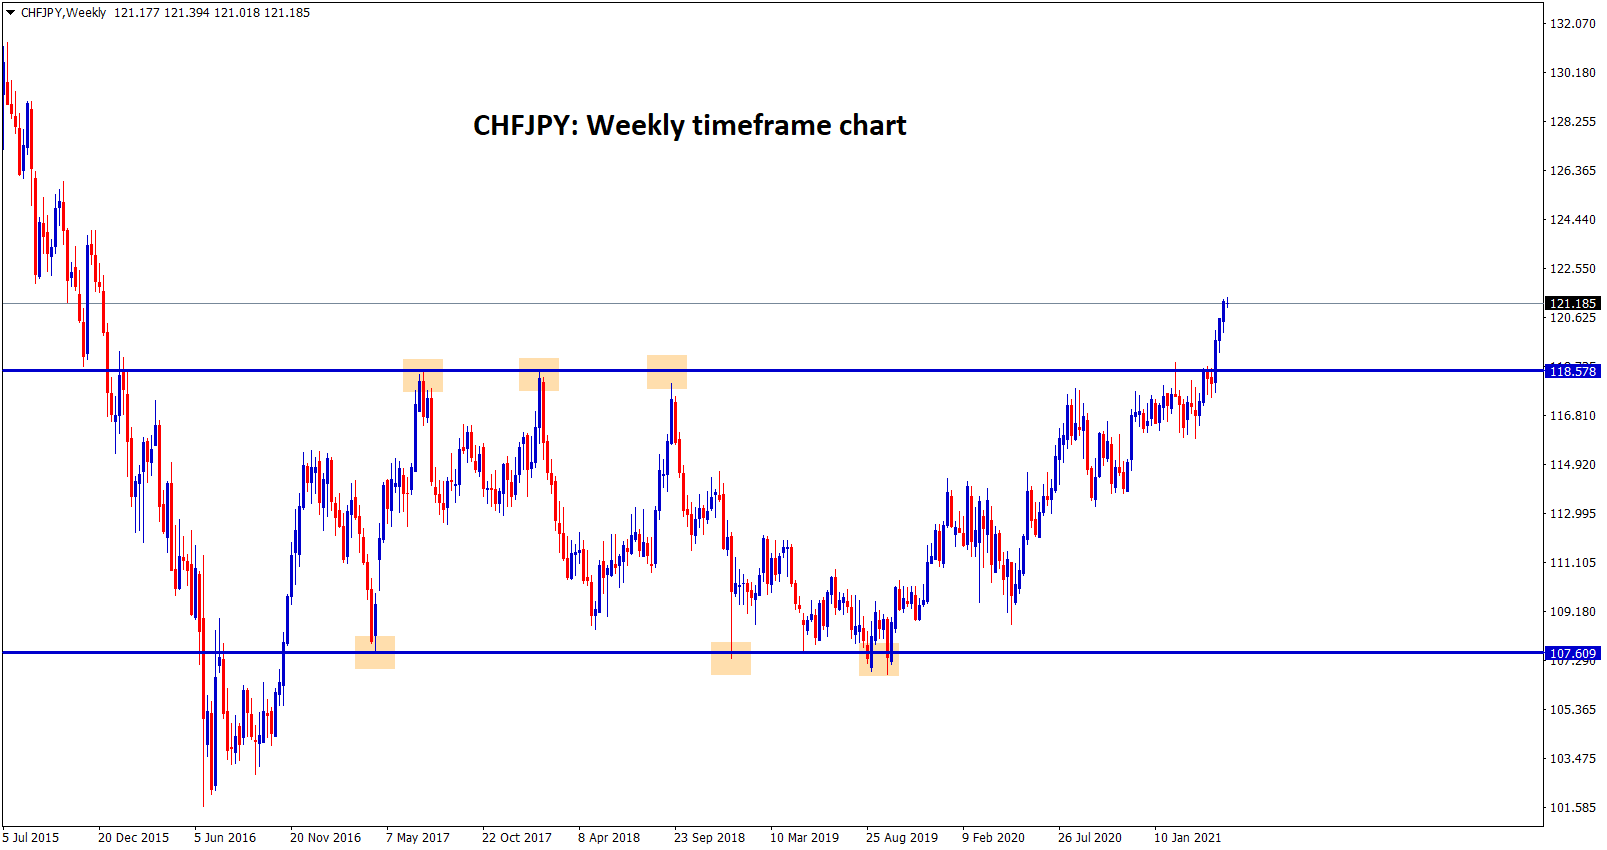 CHFJPY broken the strong resistance after 4 years and then starts to fly up.